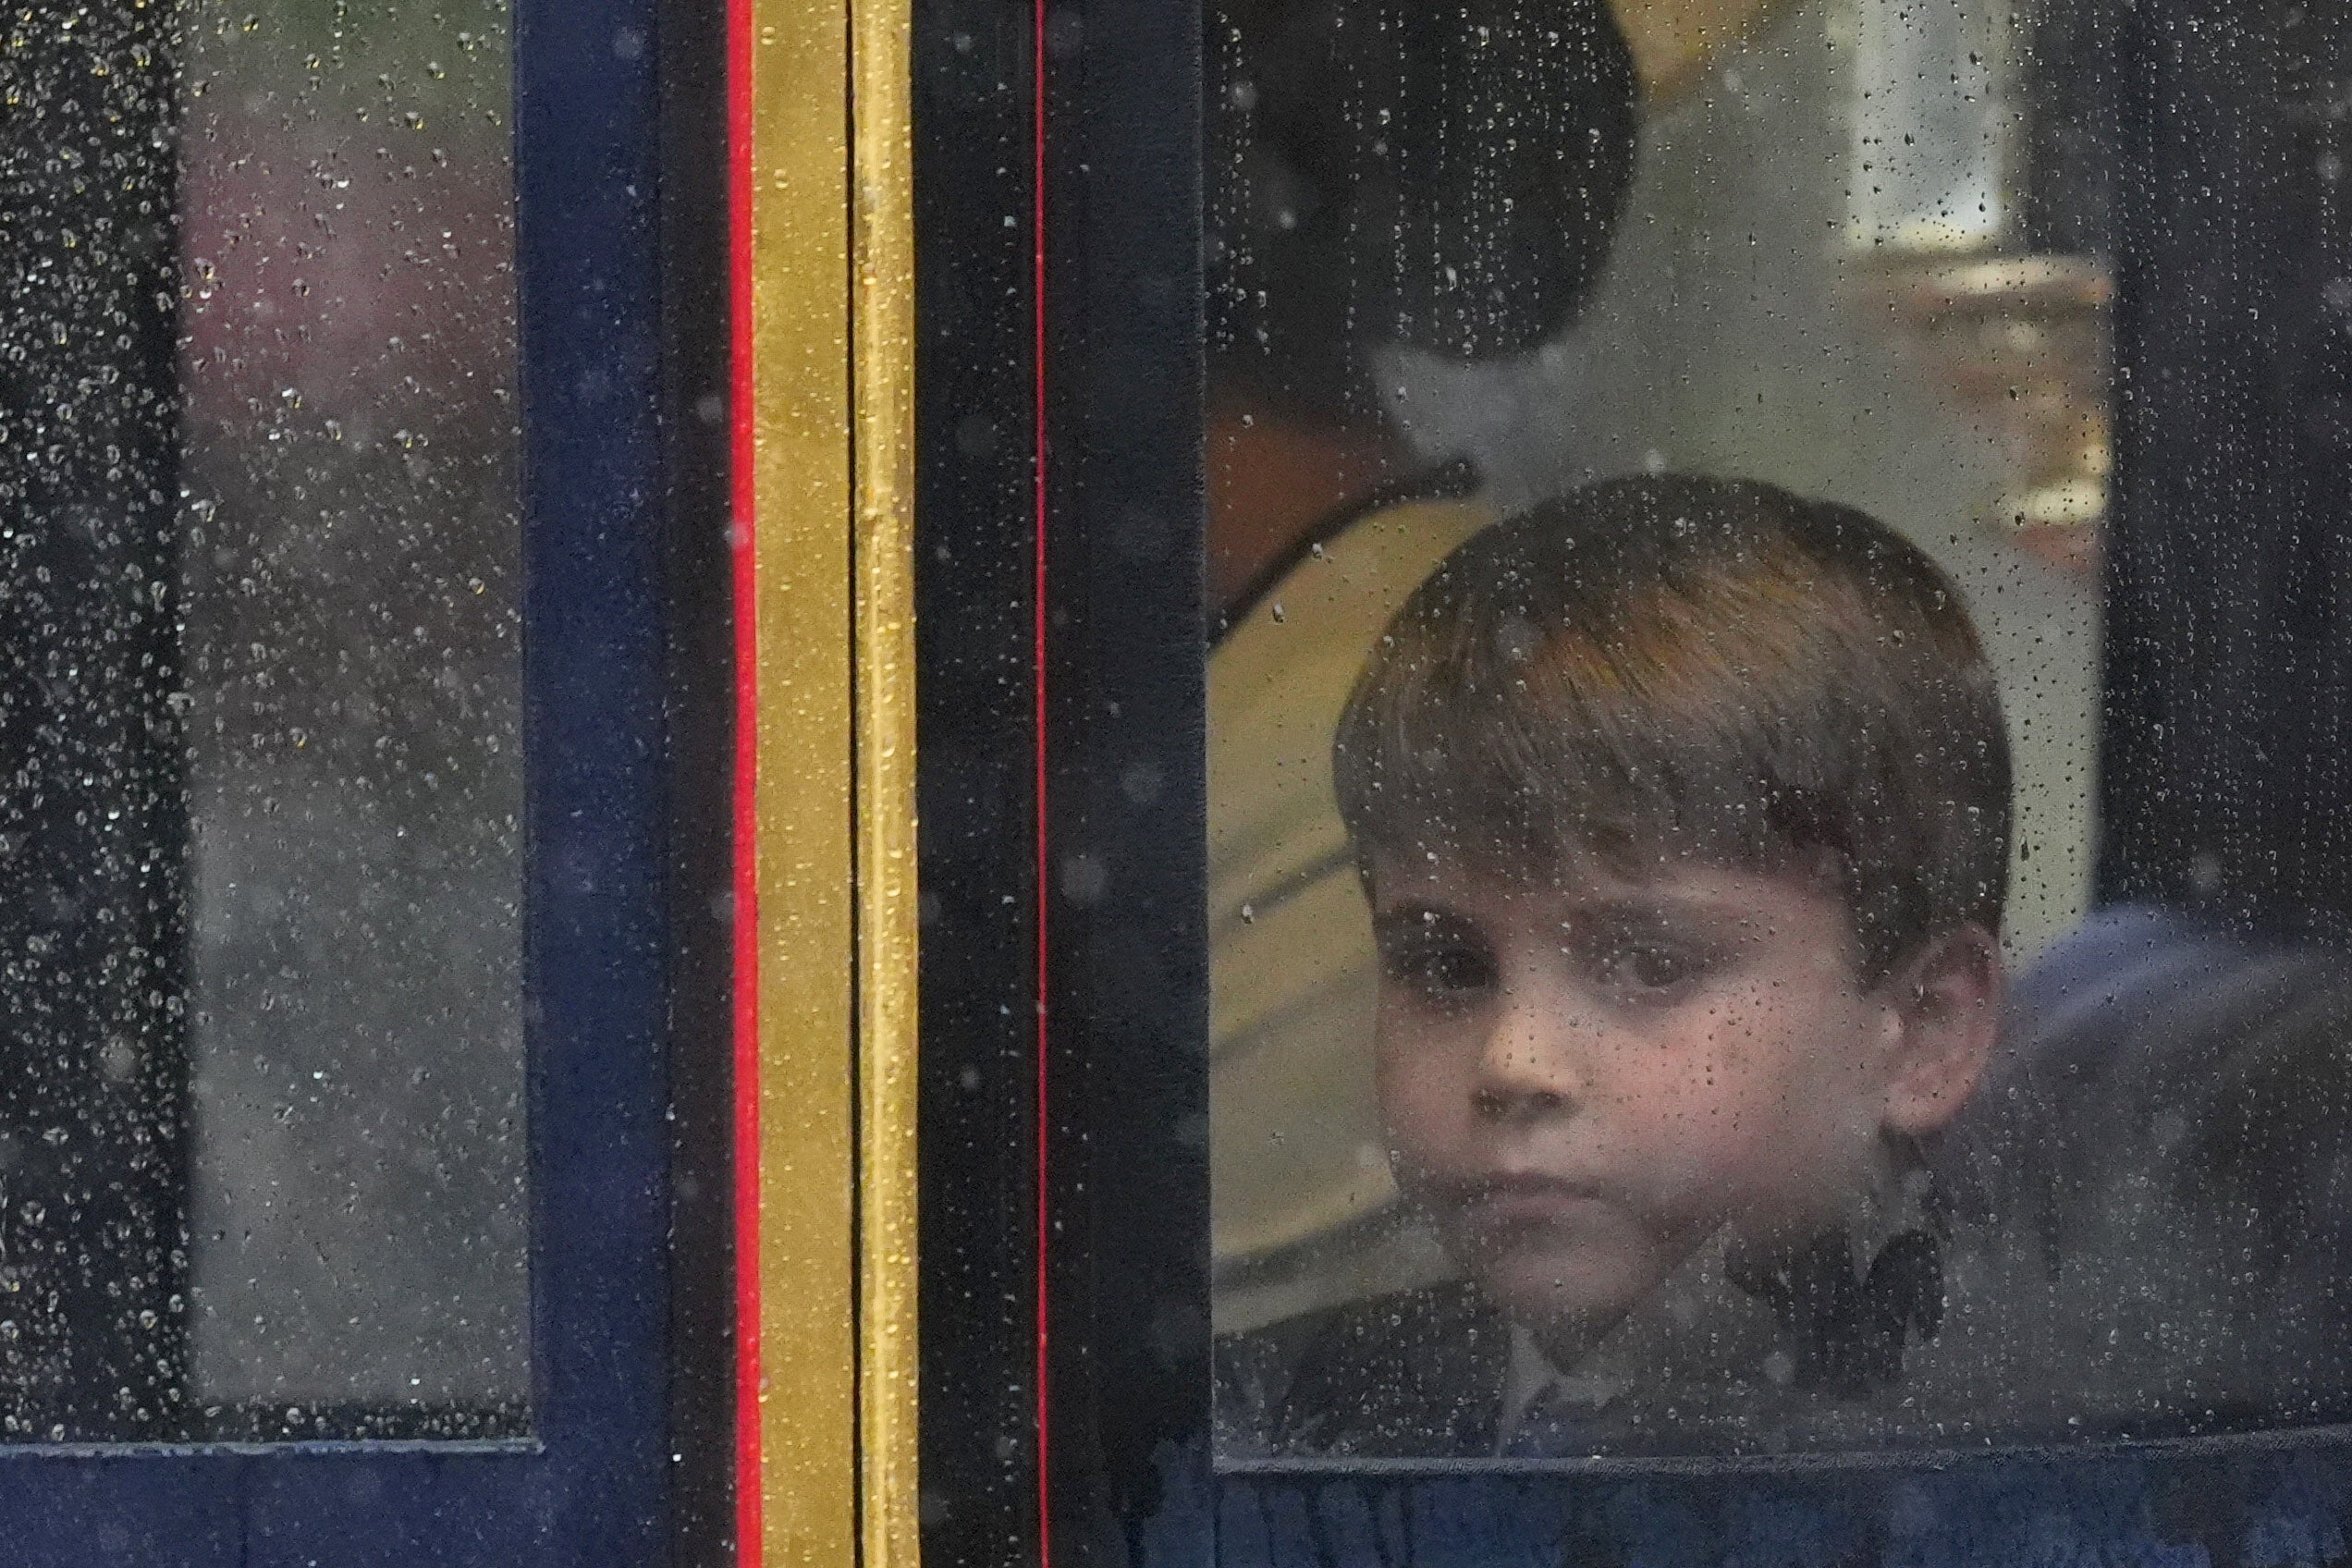 The youngest son of Kate and William looked glum when it started to rain